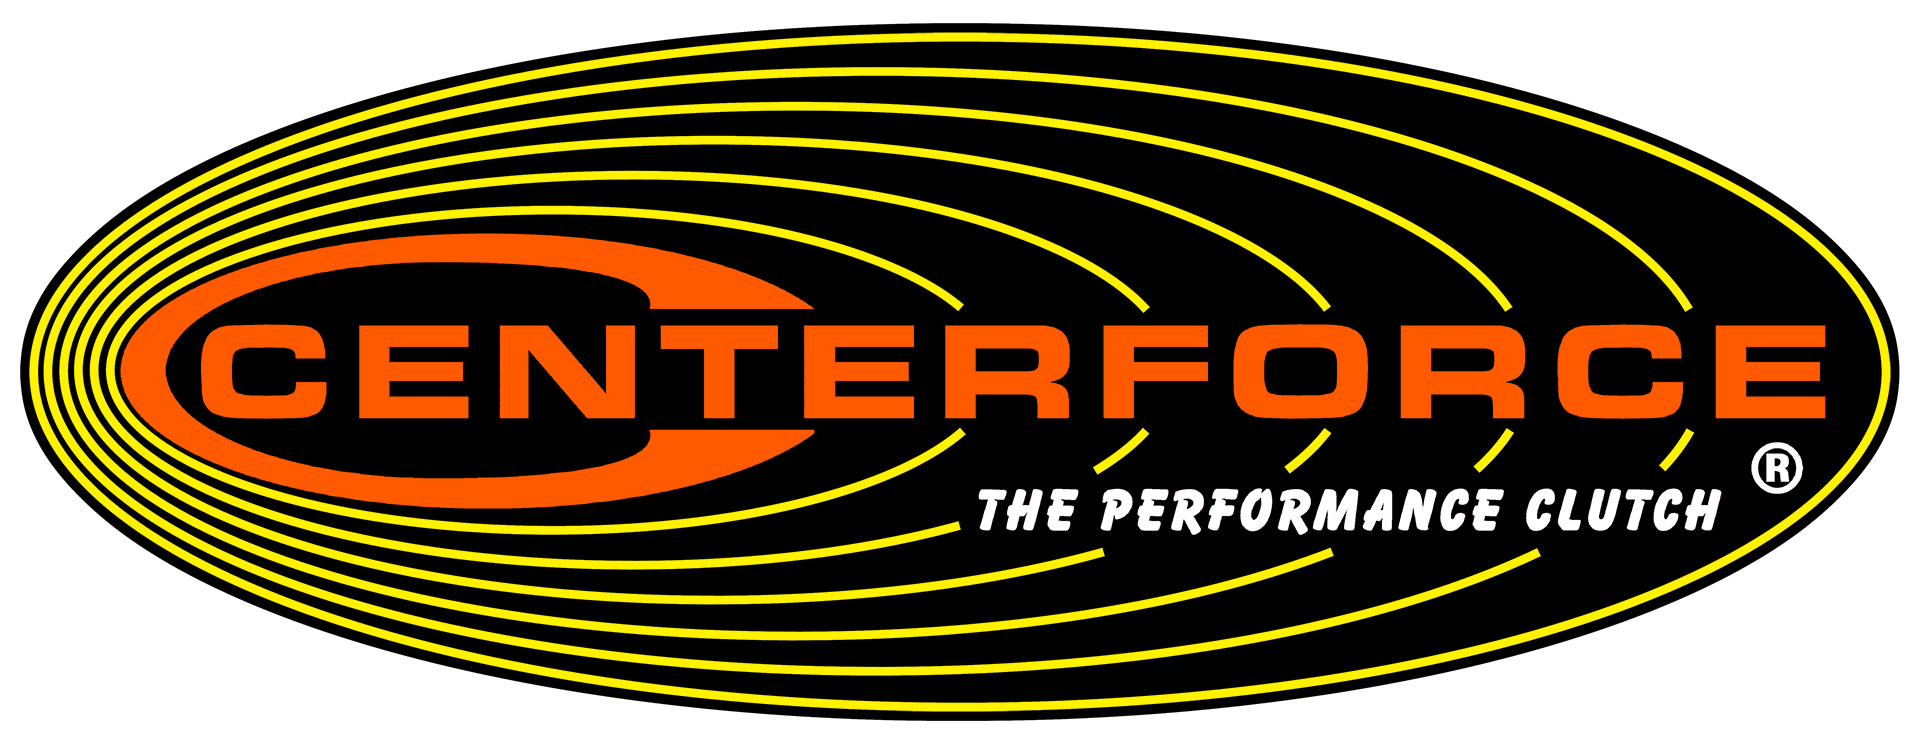 Centerforce - The Performance Clutch